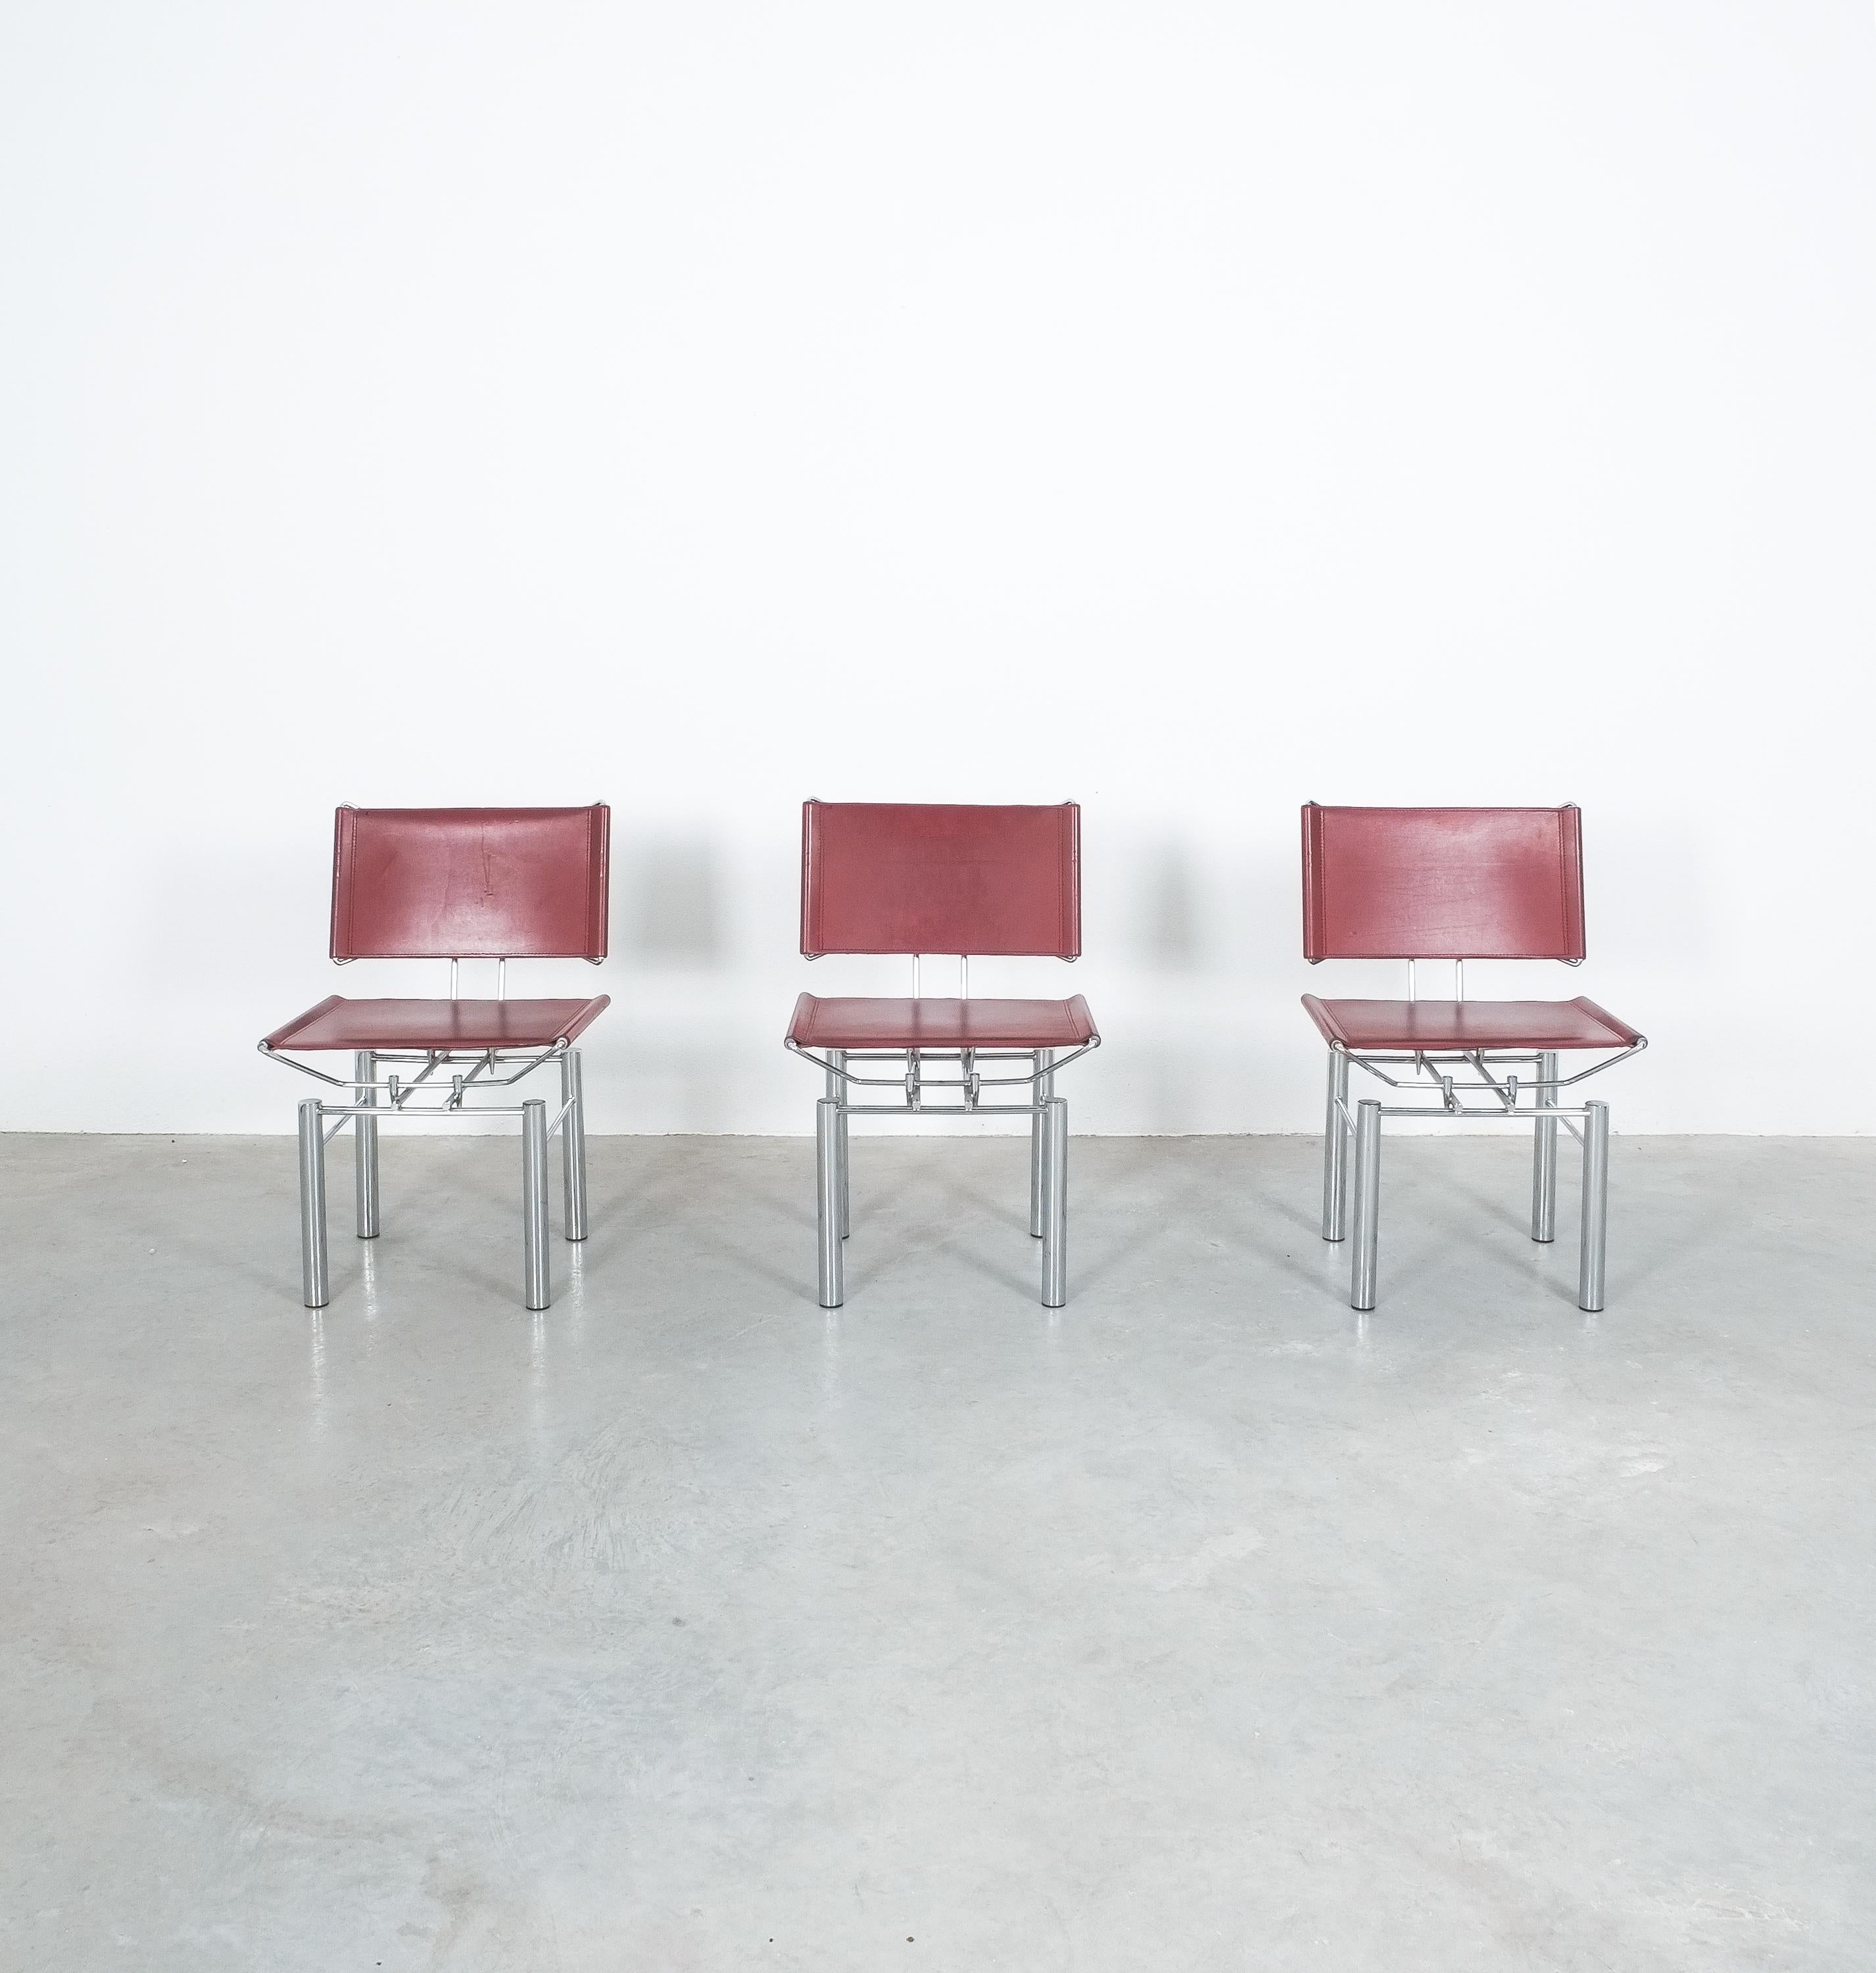 Hans Ullrich Bitsch Chairs Set of 6 Red Leather Chrome Metal Series 8600, 1980 For Sale 6